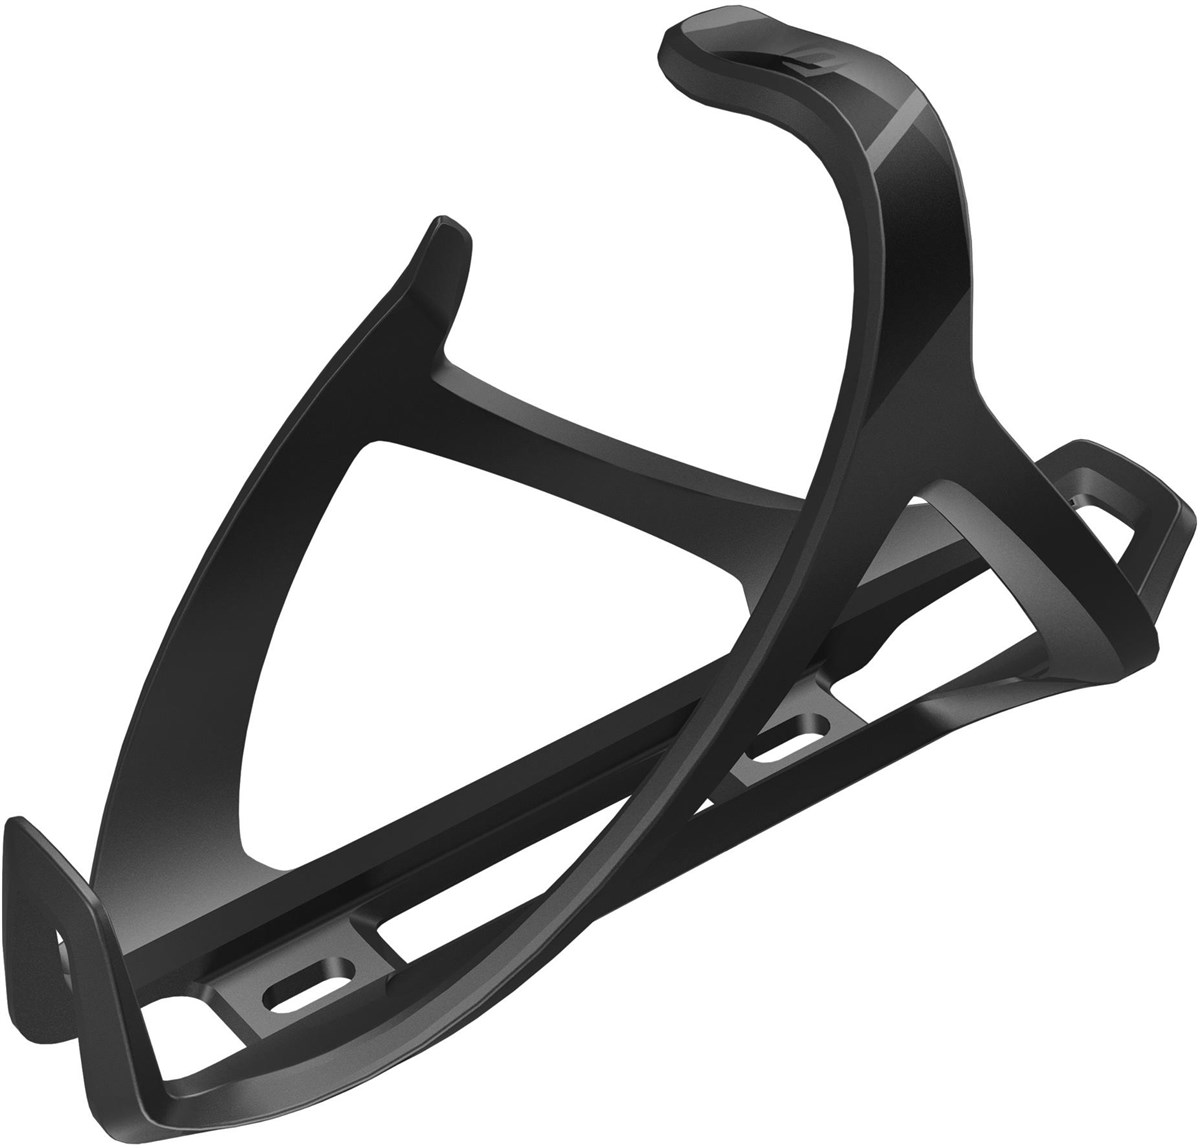 Syncros Tailor 2.0 Bottle Cage - Left product image